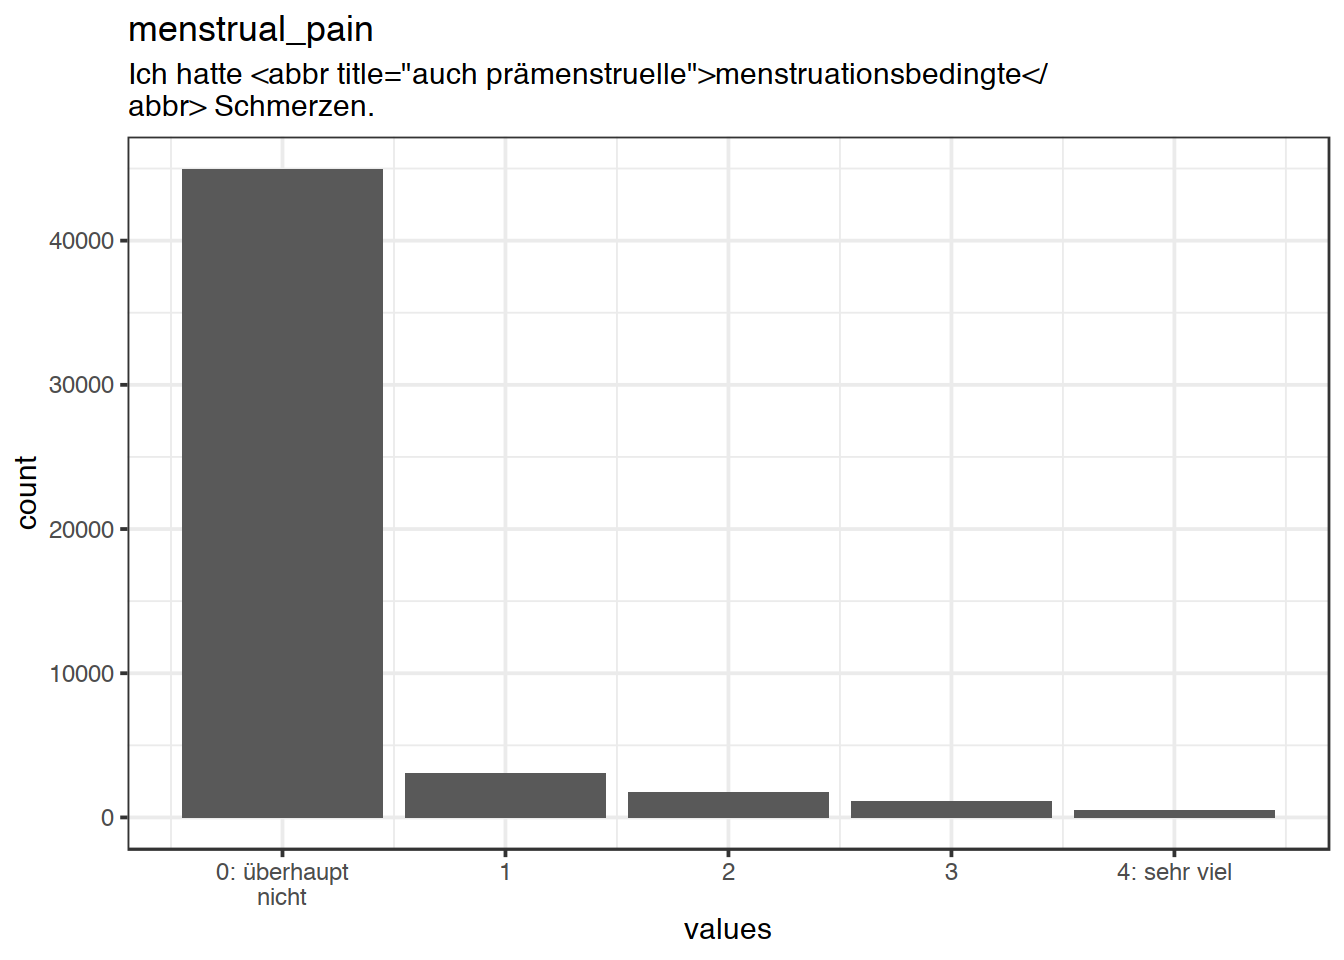 Distribution of values for menstrual_pain